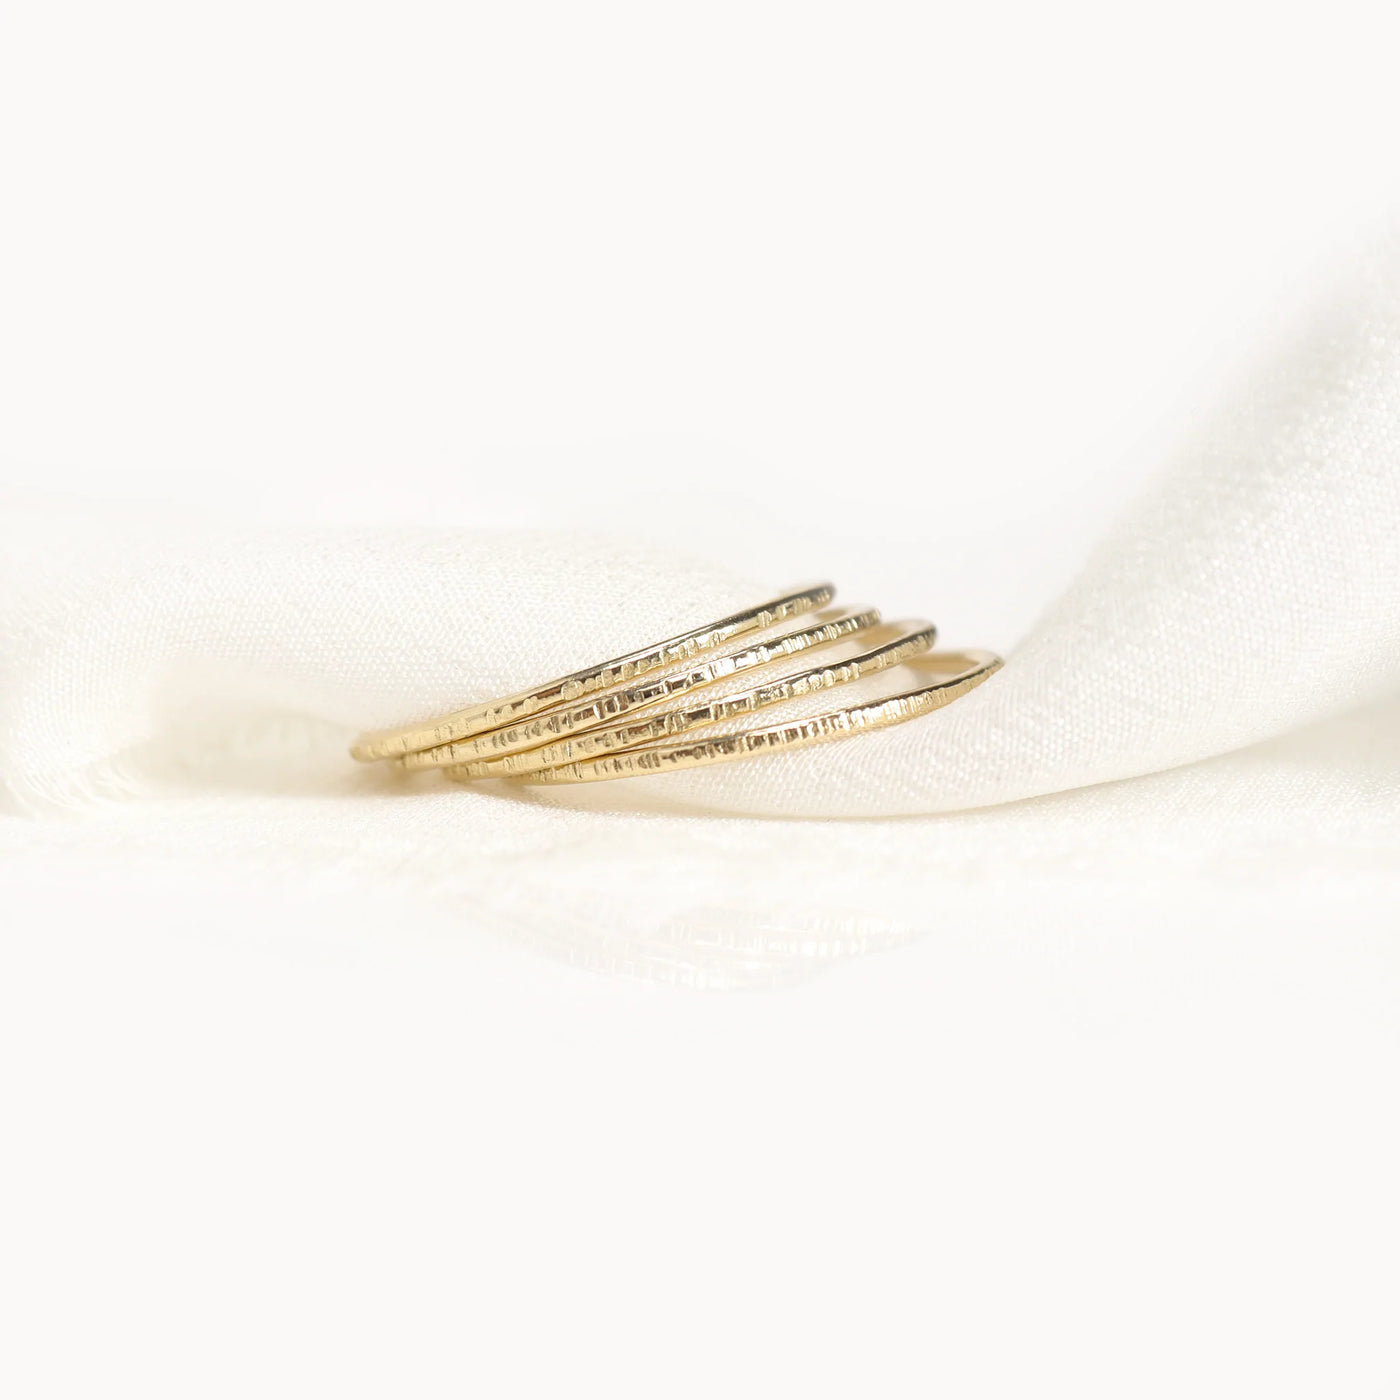 Solid 9ct Gold Bark Textured Ring